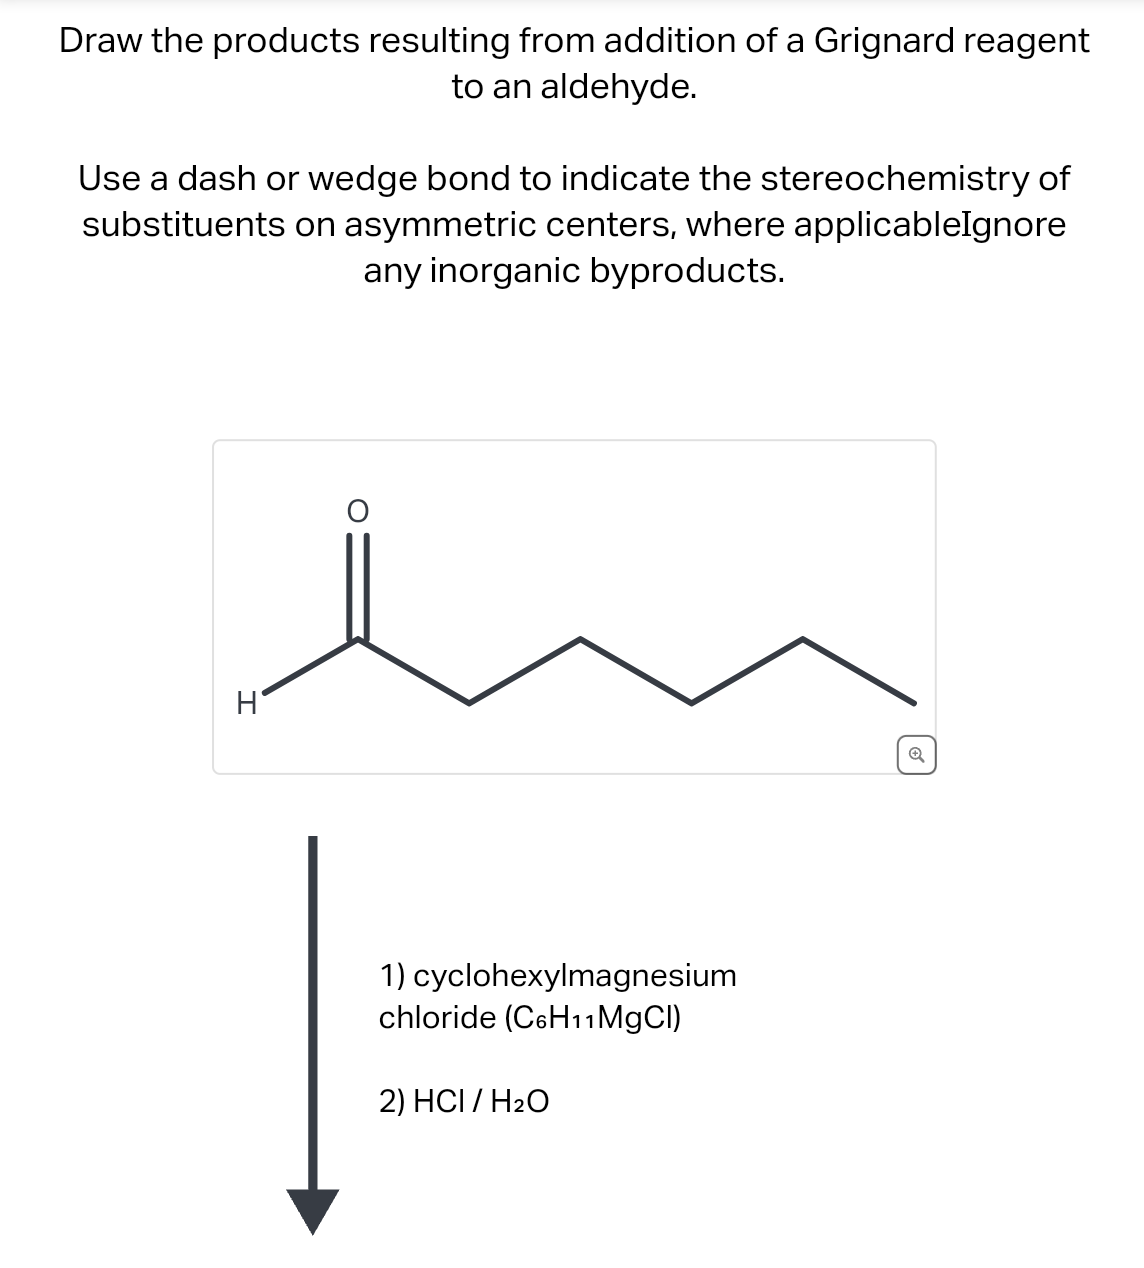 Draw the products resulting from addition of a Grignard reagent
to an aldehyde.
Use a dash or wedge bond to indicate the stereochemistry of
substituents on asymmetric centers, where applicableIgnore
any inorganic byproducts.
H
1) cyclohexylmagnesium
chloride (C6H11MgCl)
2) HCI/H₂O
Q